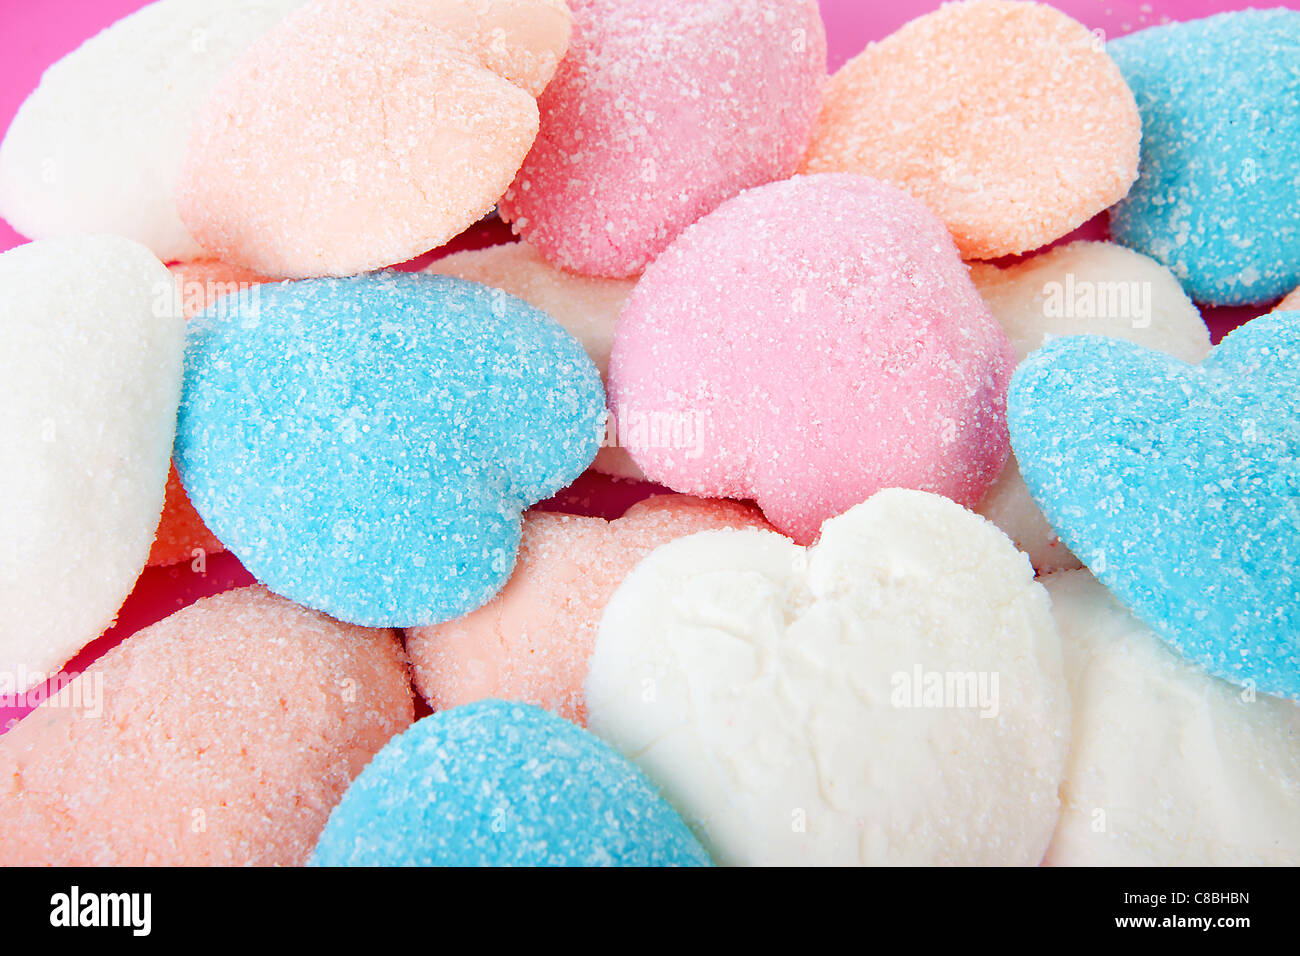 background of sugared candy in hearts shape Stock Photo